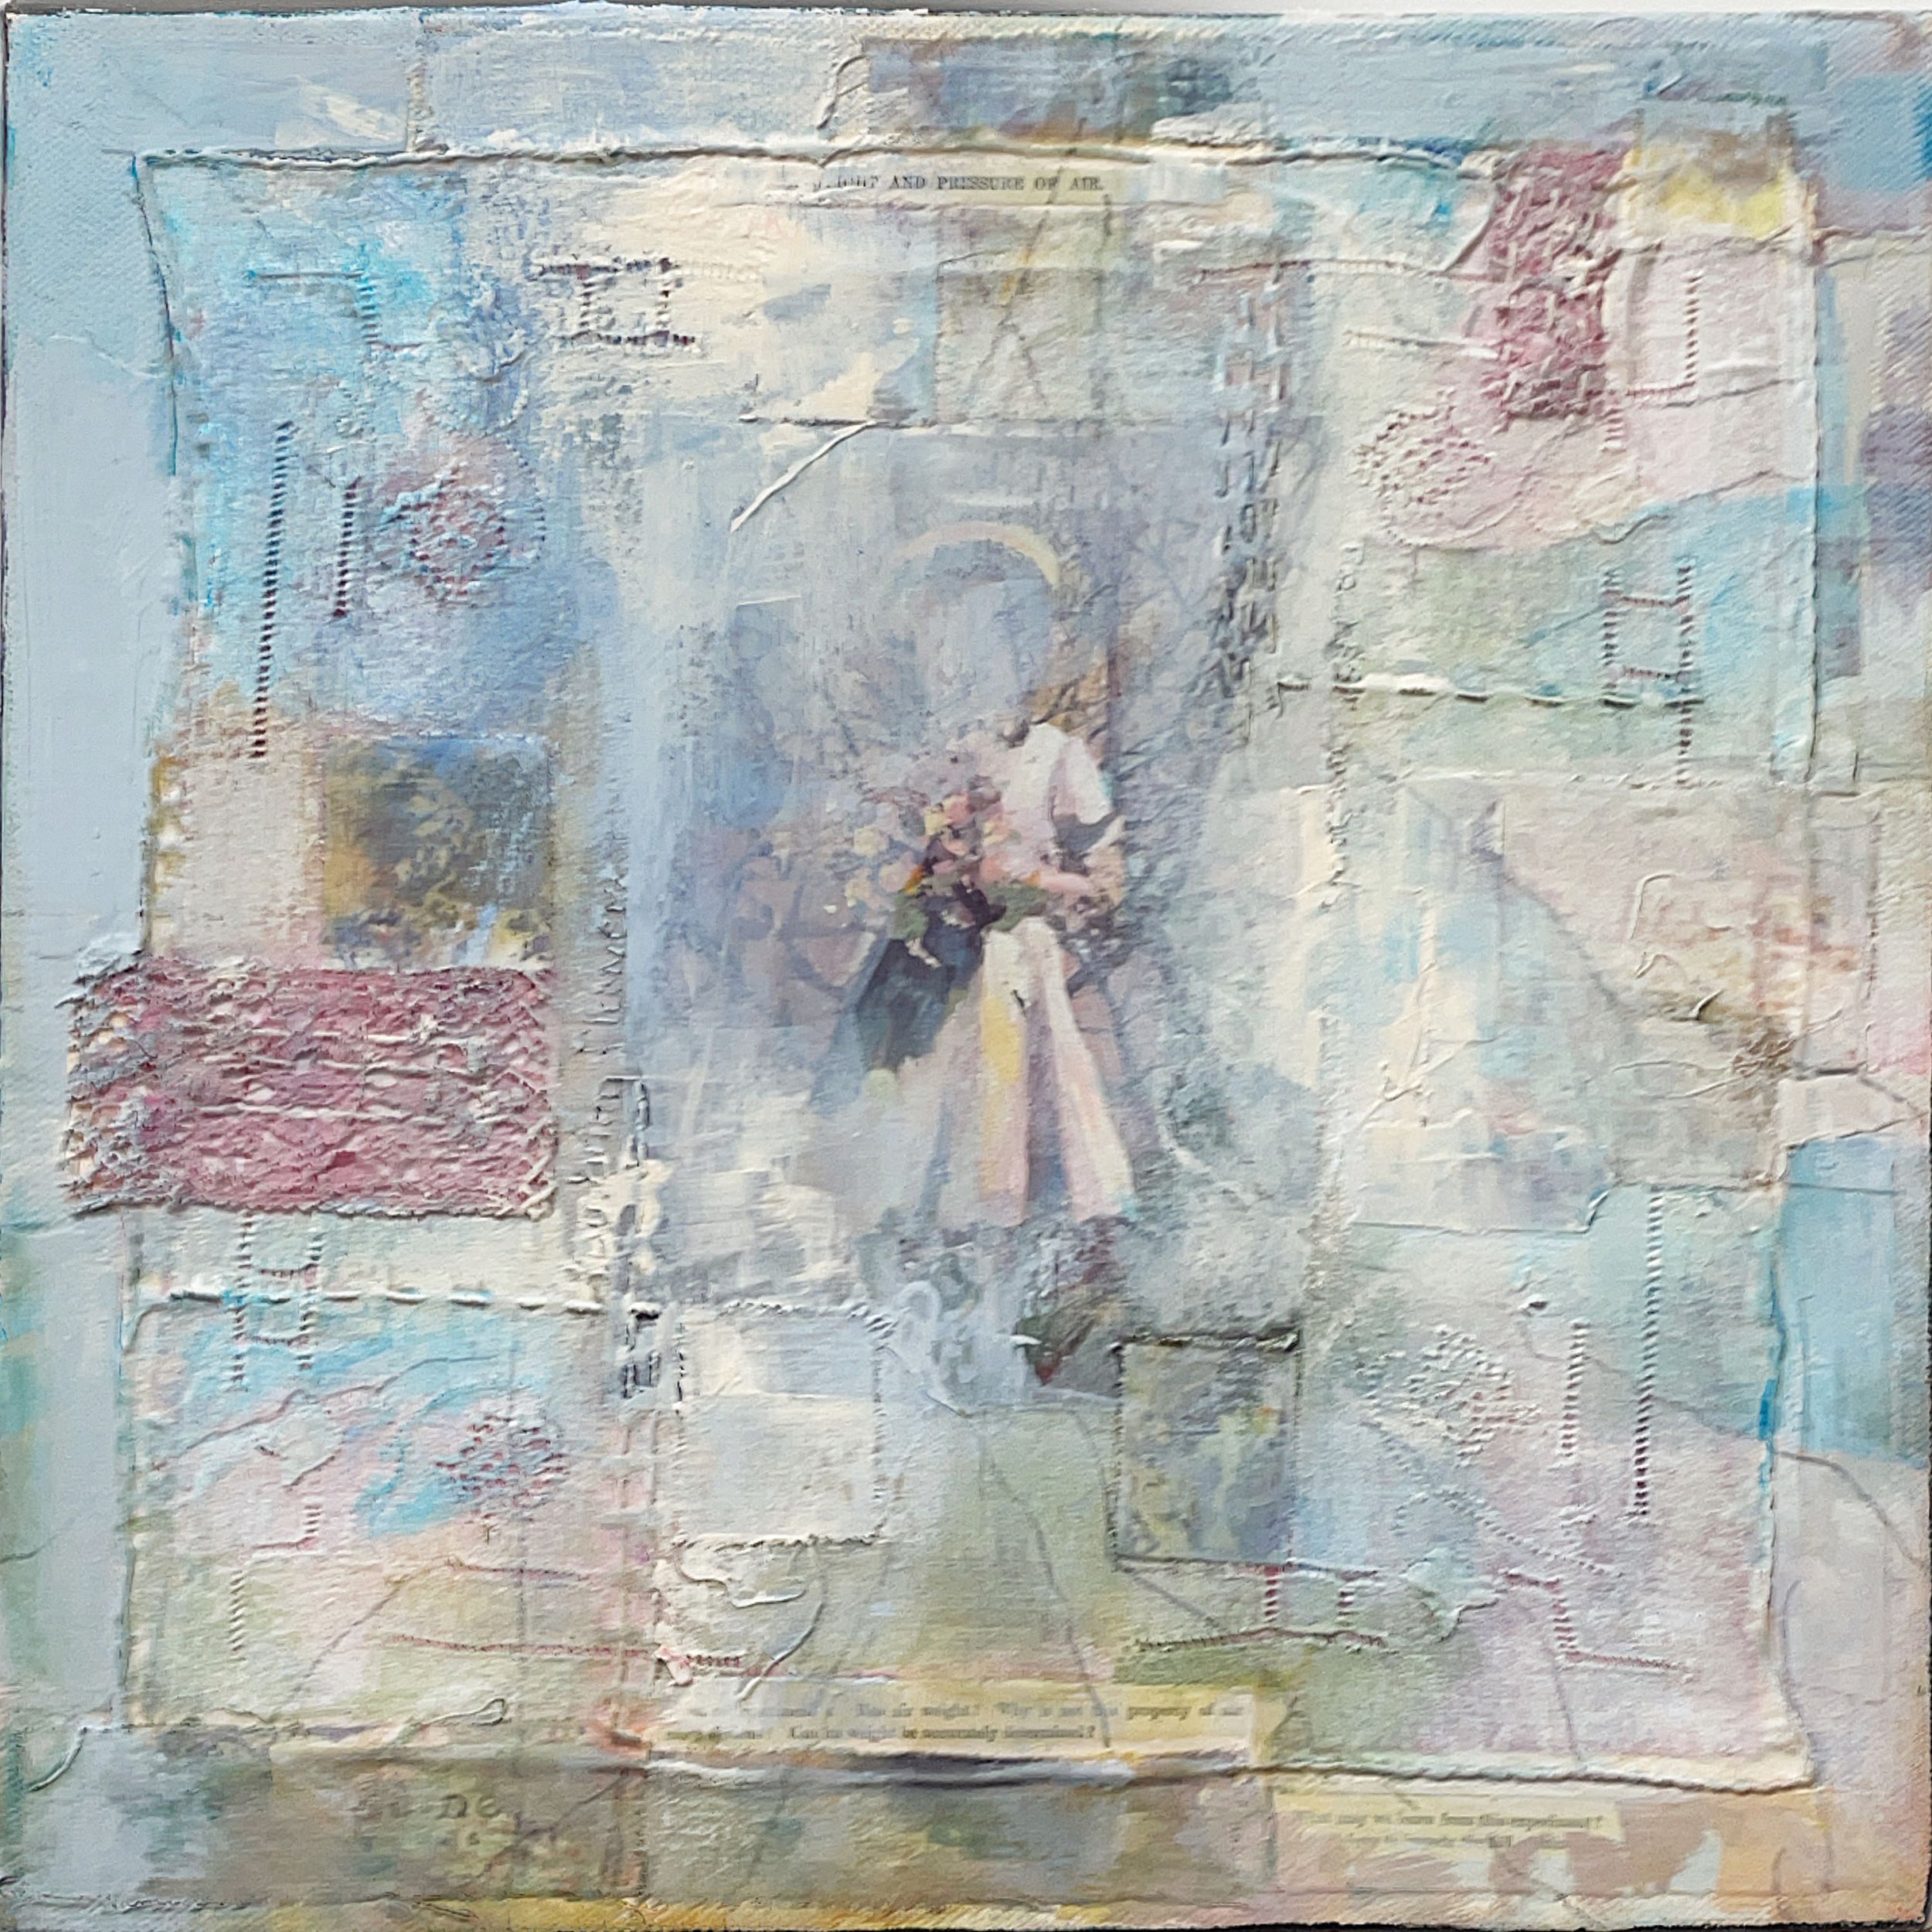 Dunn_The Weight of Air_vintage linens, acrylic, image transfer, found papers, graphite on deep canvas_12x12_$250.jpg